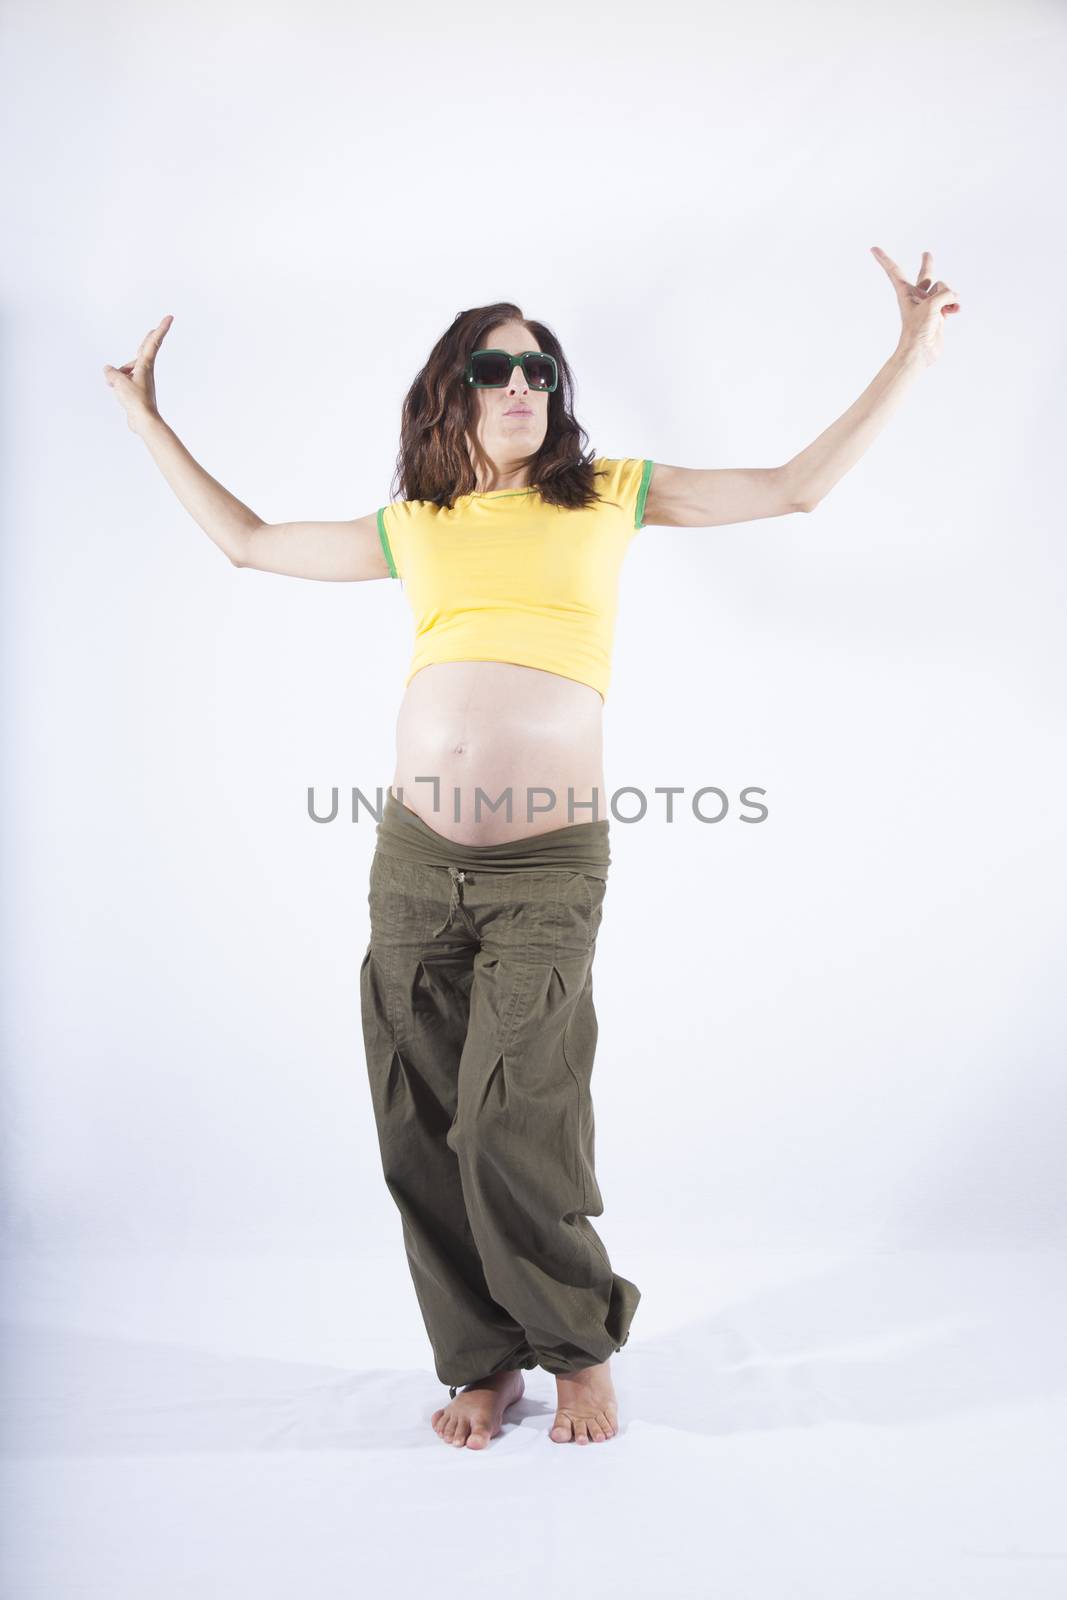 front of naked paunch eight month pregnant woman with brazilian colors shirt celebrating success winner isolated on over white background